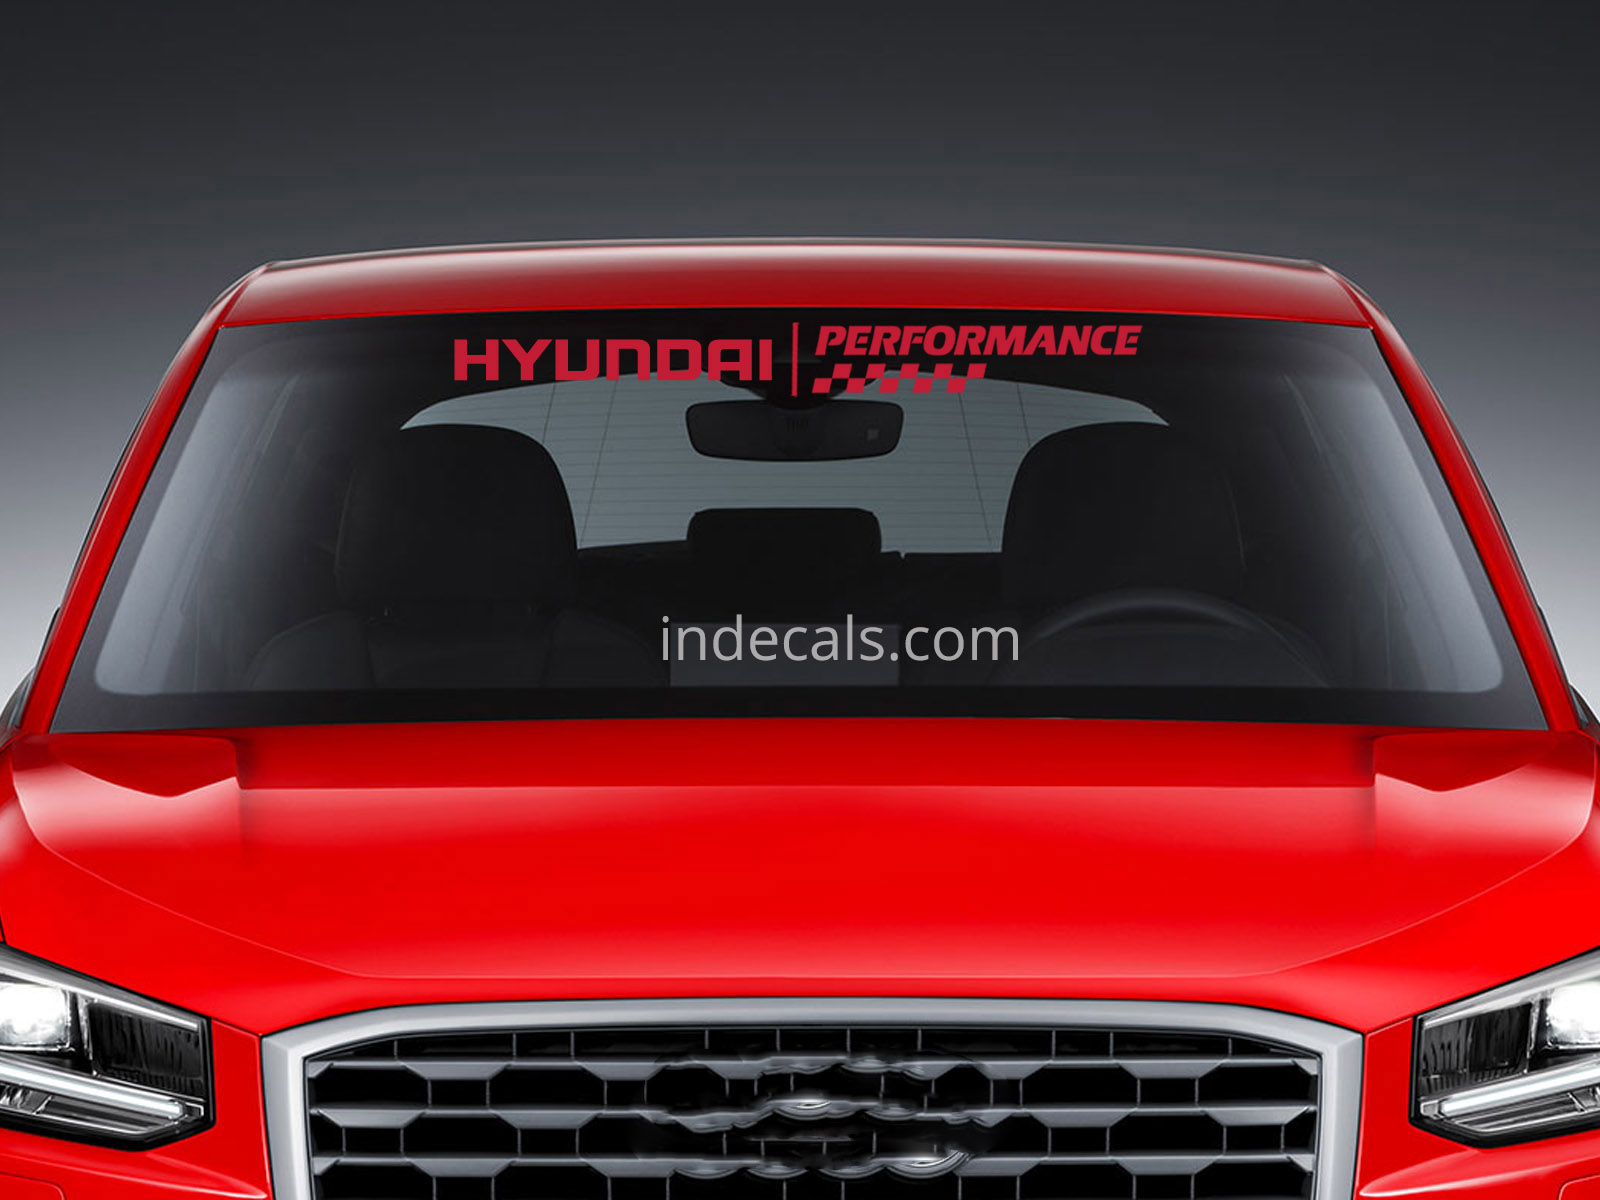 1 x Hyundai Performance Sticker for Windshield or Back Window - Red